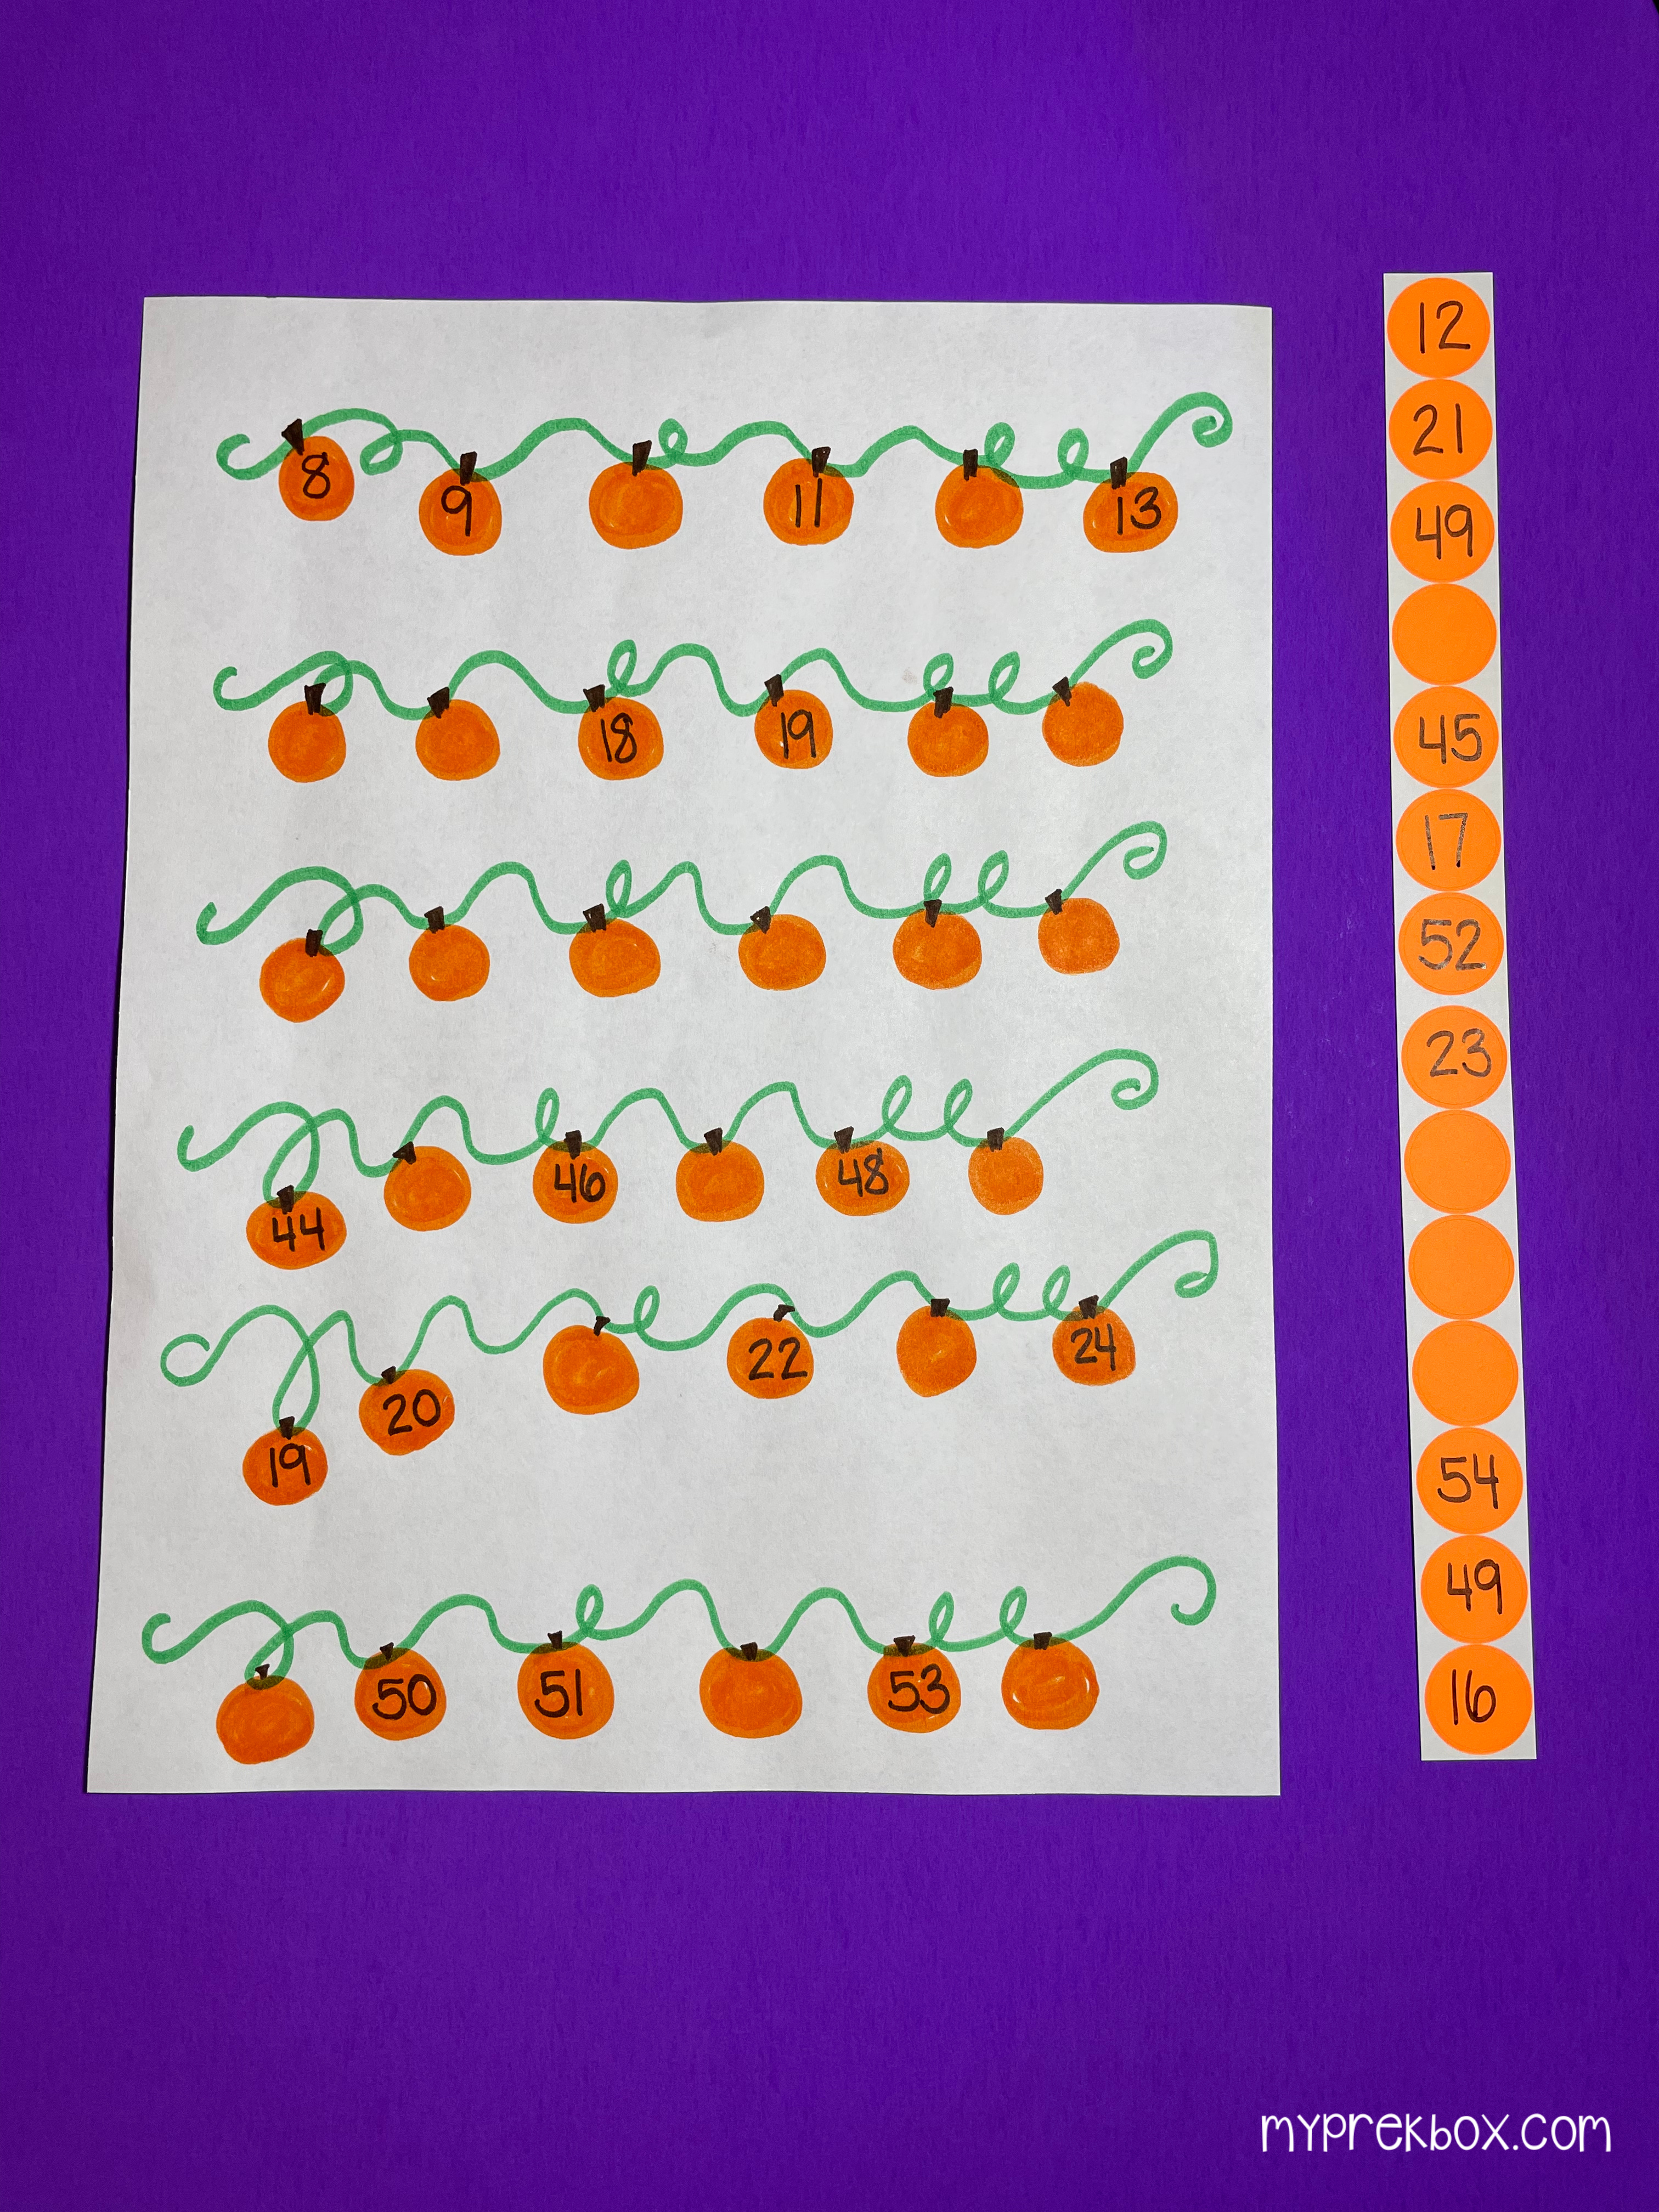 pumpkins on a vine with numbered stickers